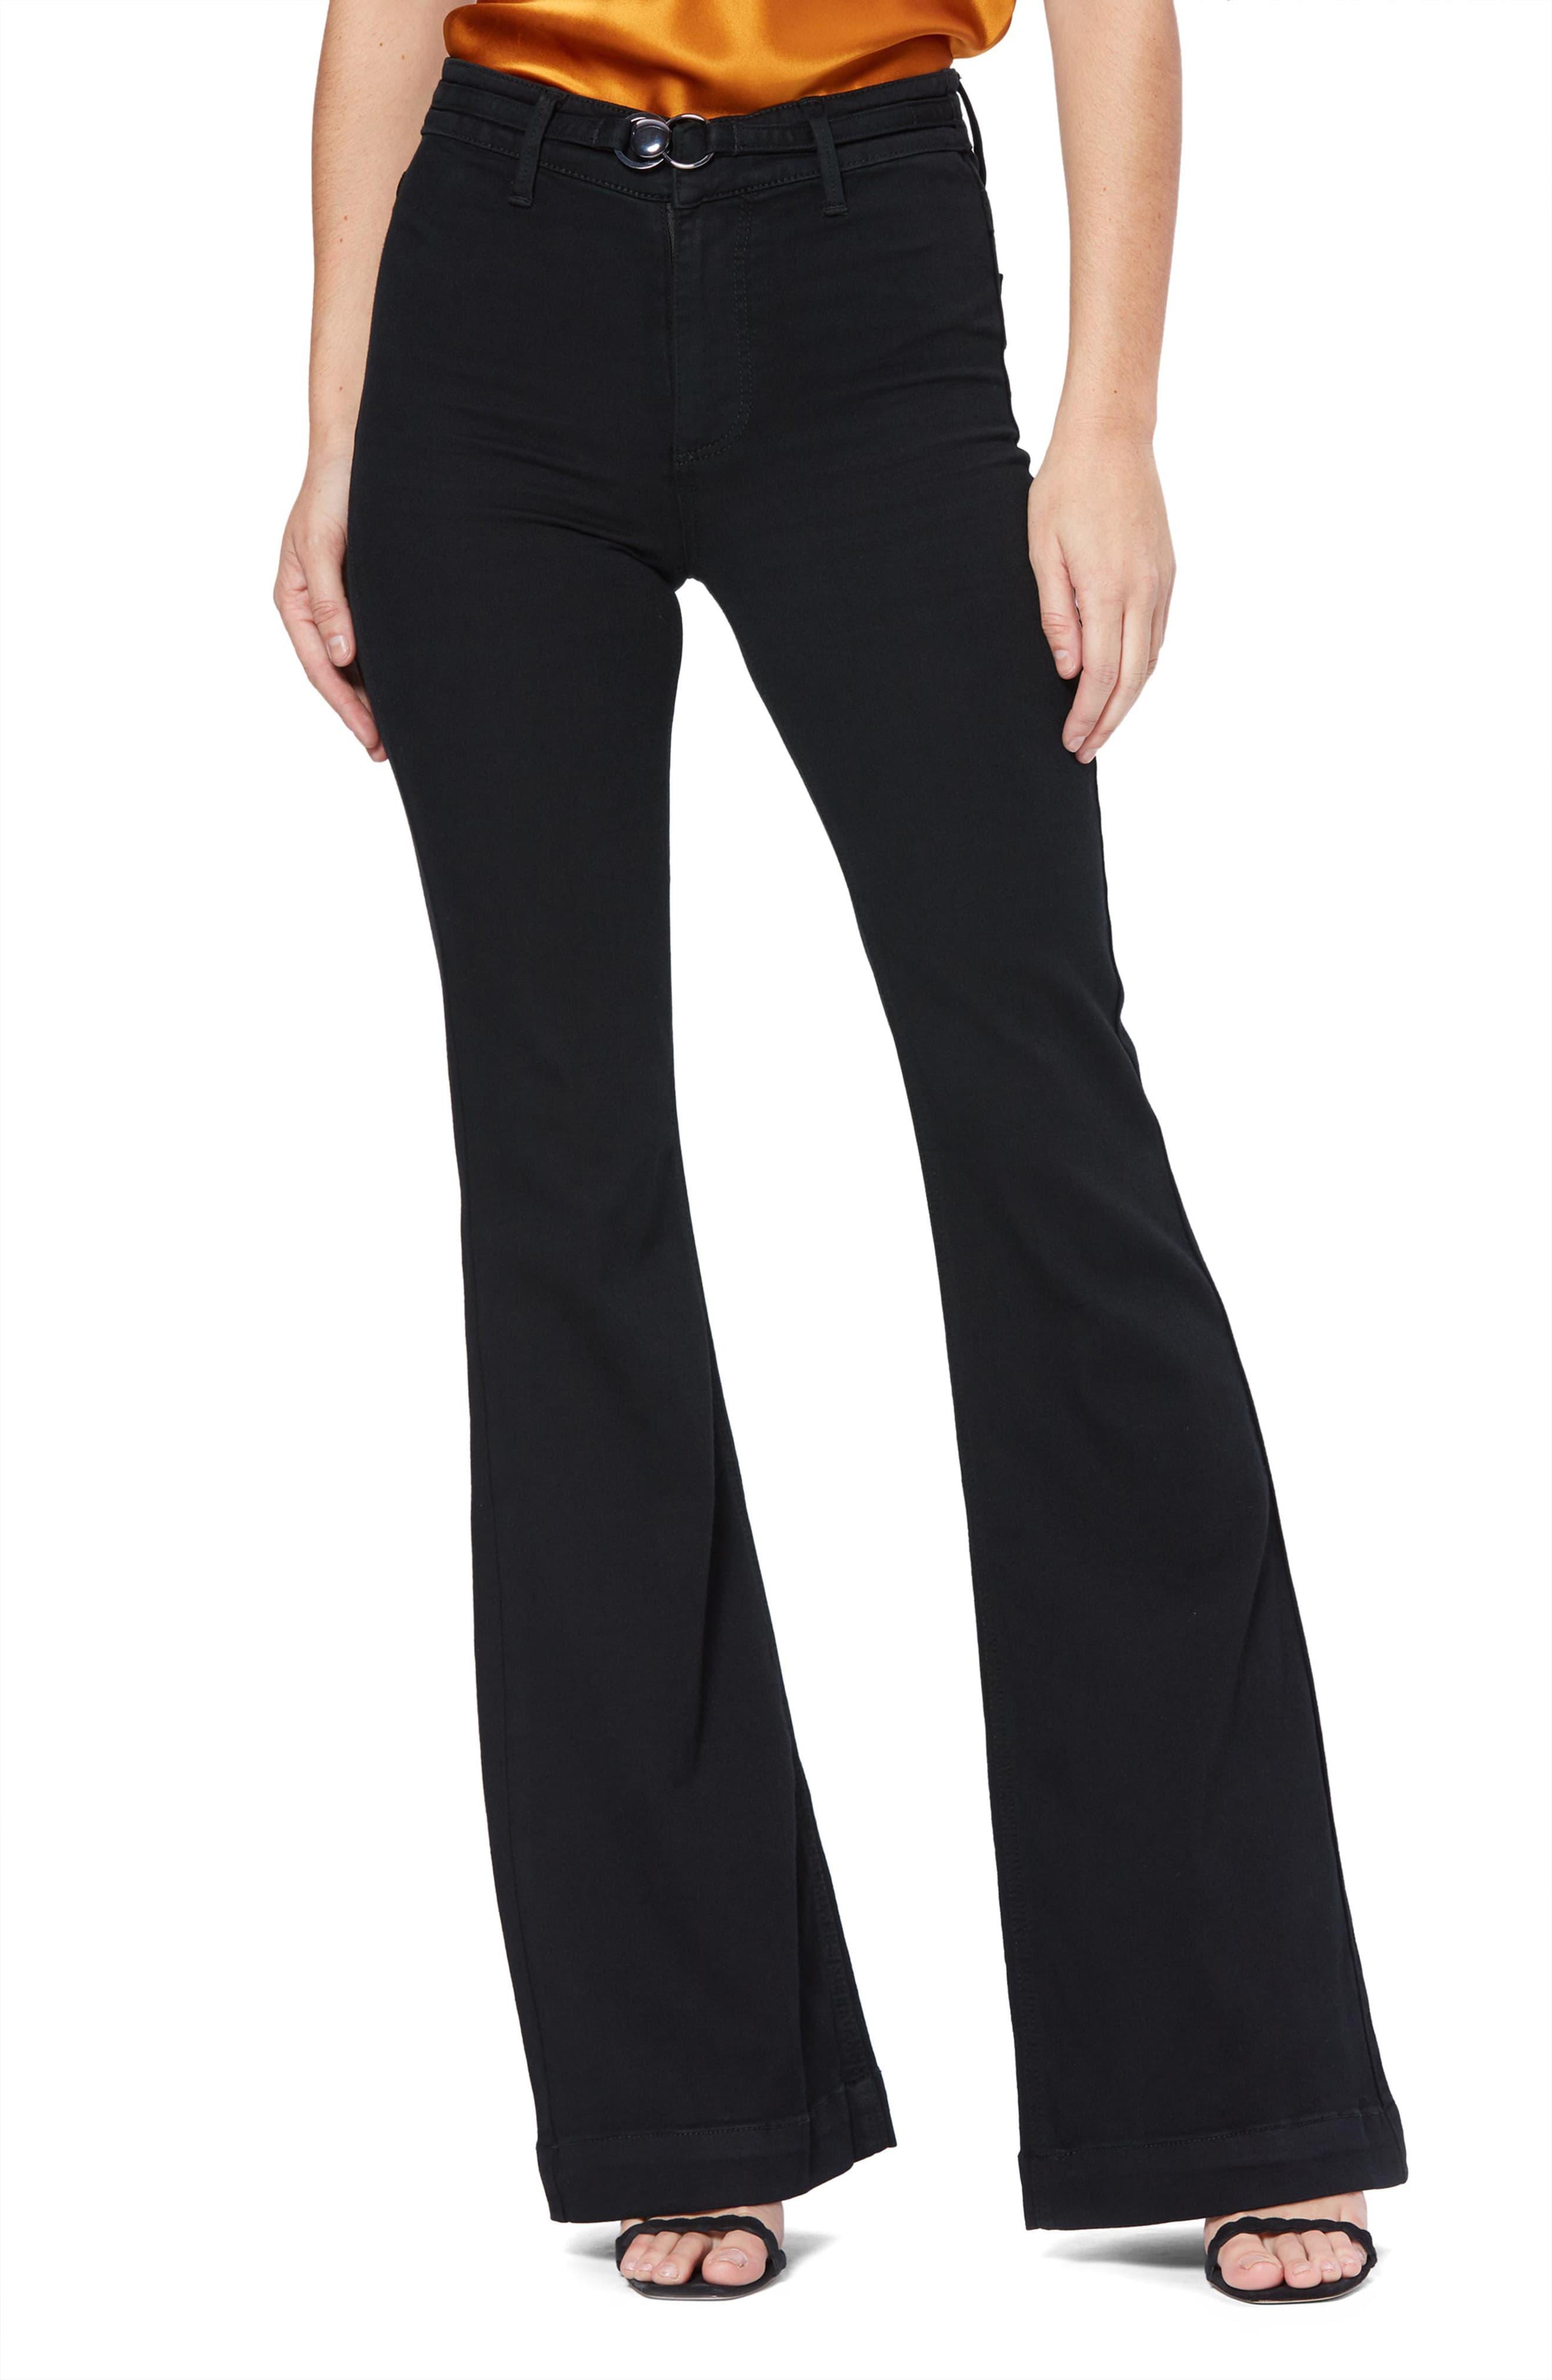 PAIGE Denim Transcend Genevieve High Rise Buckle Flare Jeans in Black ...